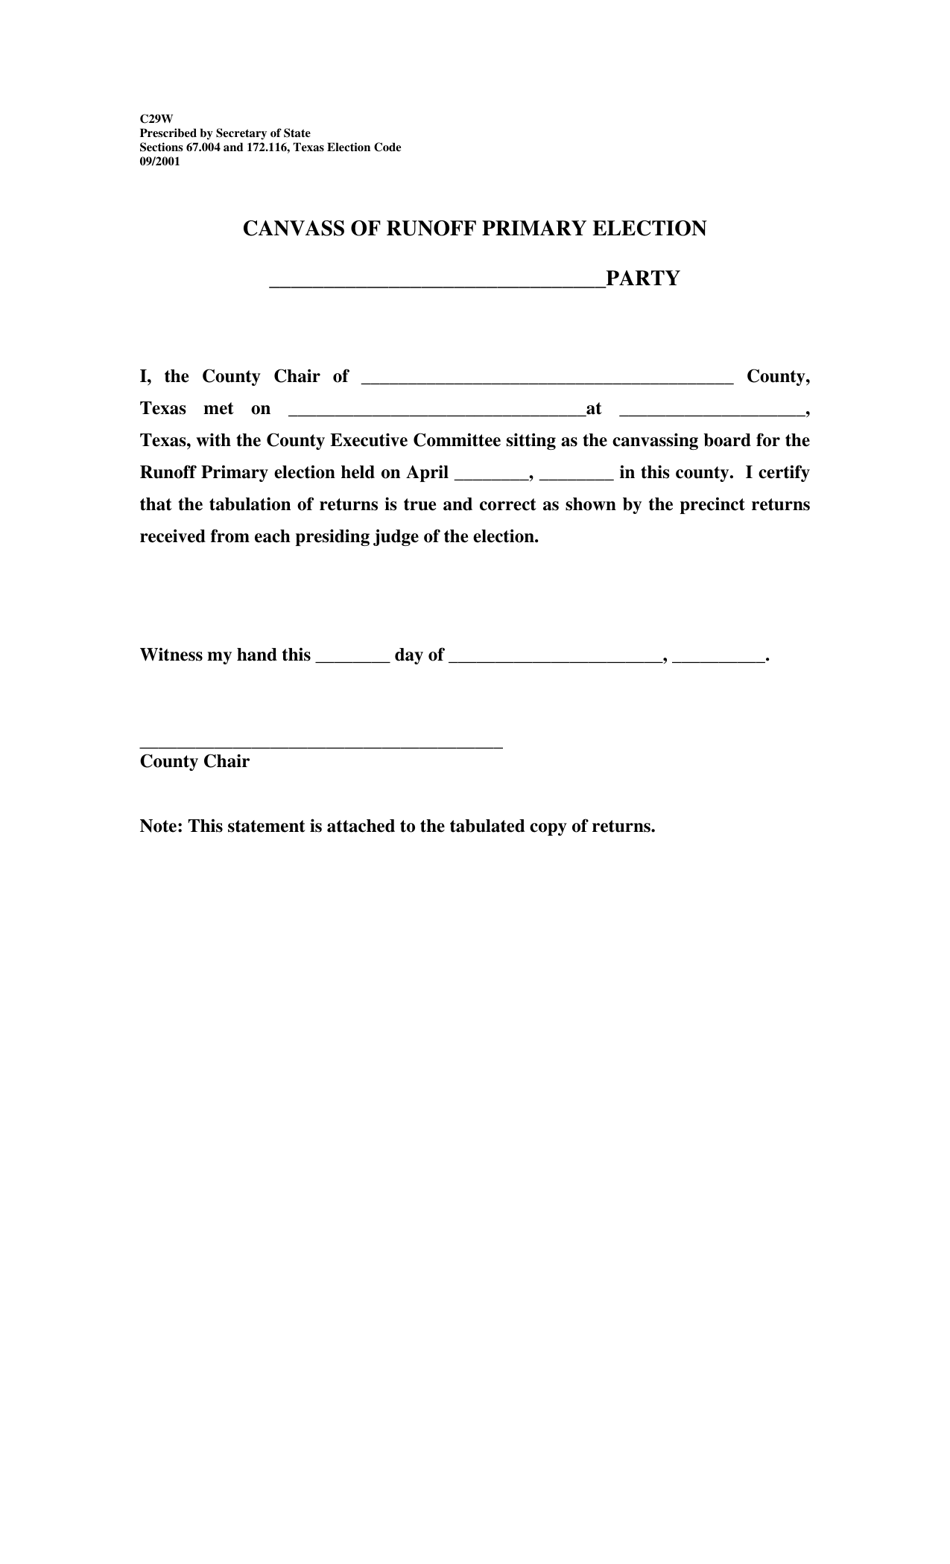 Form C29W Canvass of Runoff Primary Election - Texas, Page 1